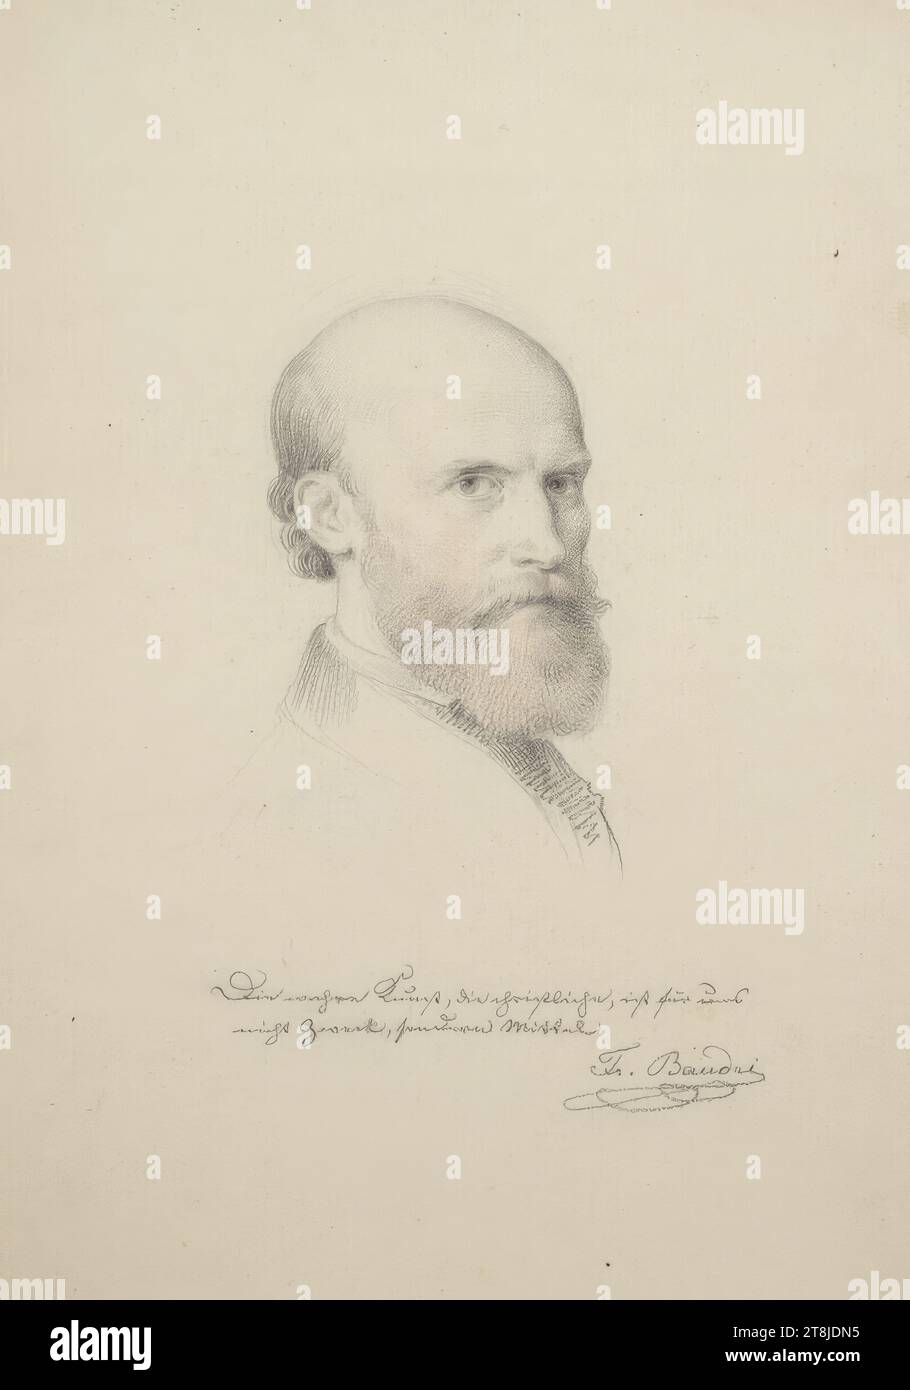 The glass painter, art writer and politician Friedrich Baudri, 1808–1874, Leopold Kupelwieser, Markt Piesting 1796 - 1862 Vienna, drawing, chalk, red chalk, mount cutout: 34.4 x 24.cm, 13 9/16 x 9 7/16in ., M.u. 'True art, Christian art, is for us / not an end but a means / Ms. Baudri, Austria Stock Photo